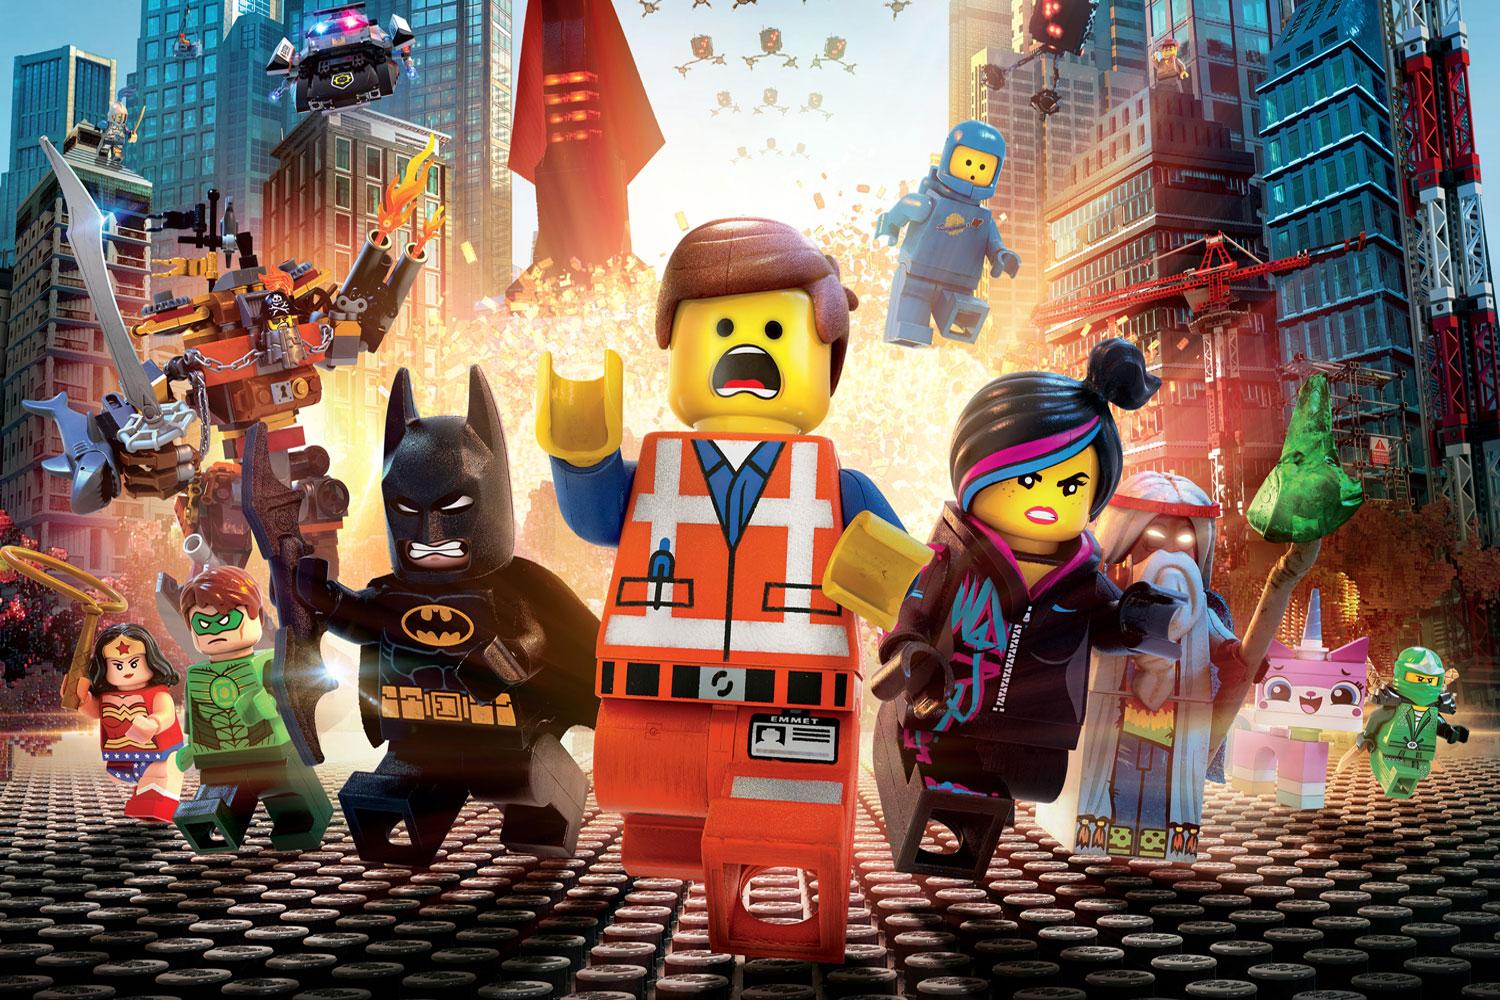 The cast of The Lego Movie.